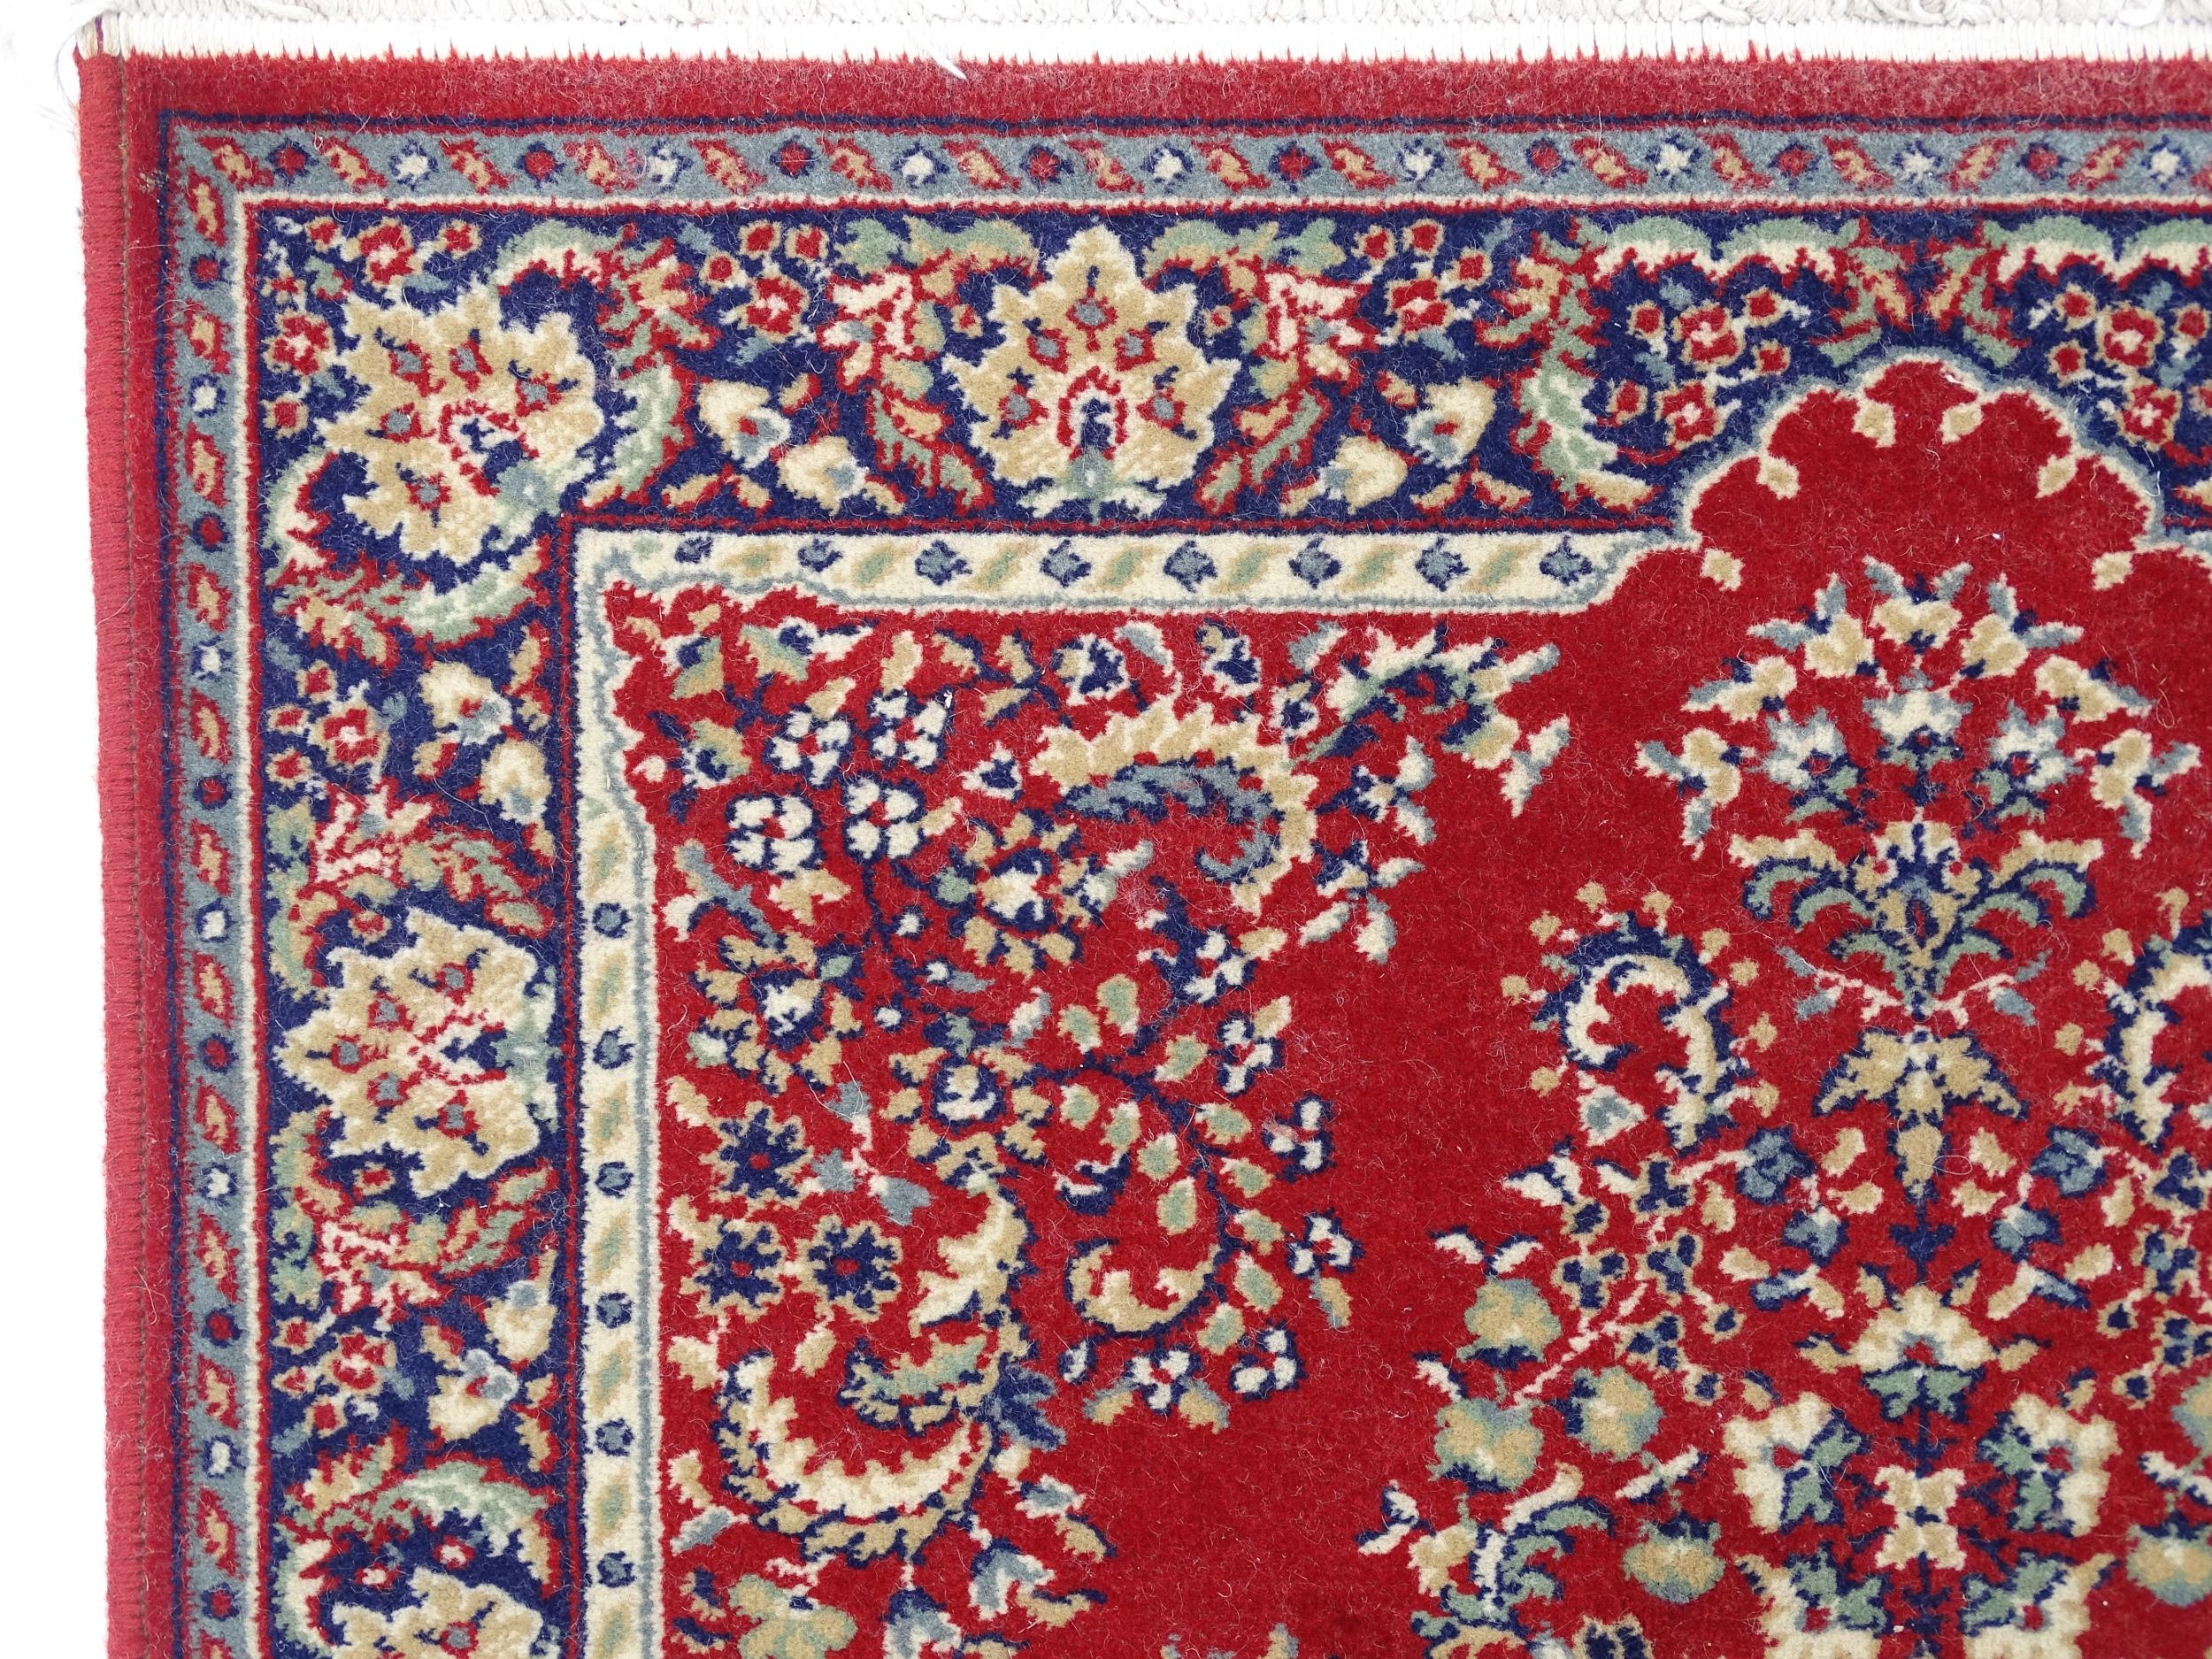 Carpet / Rug : A red ground rug with central cream and blue vignette, decorated with floral and - Image 3 of 6